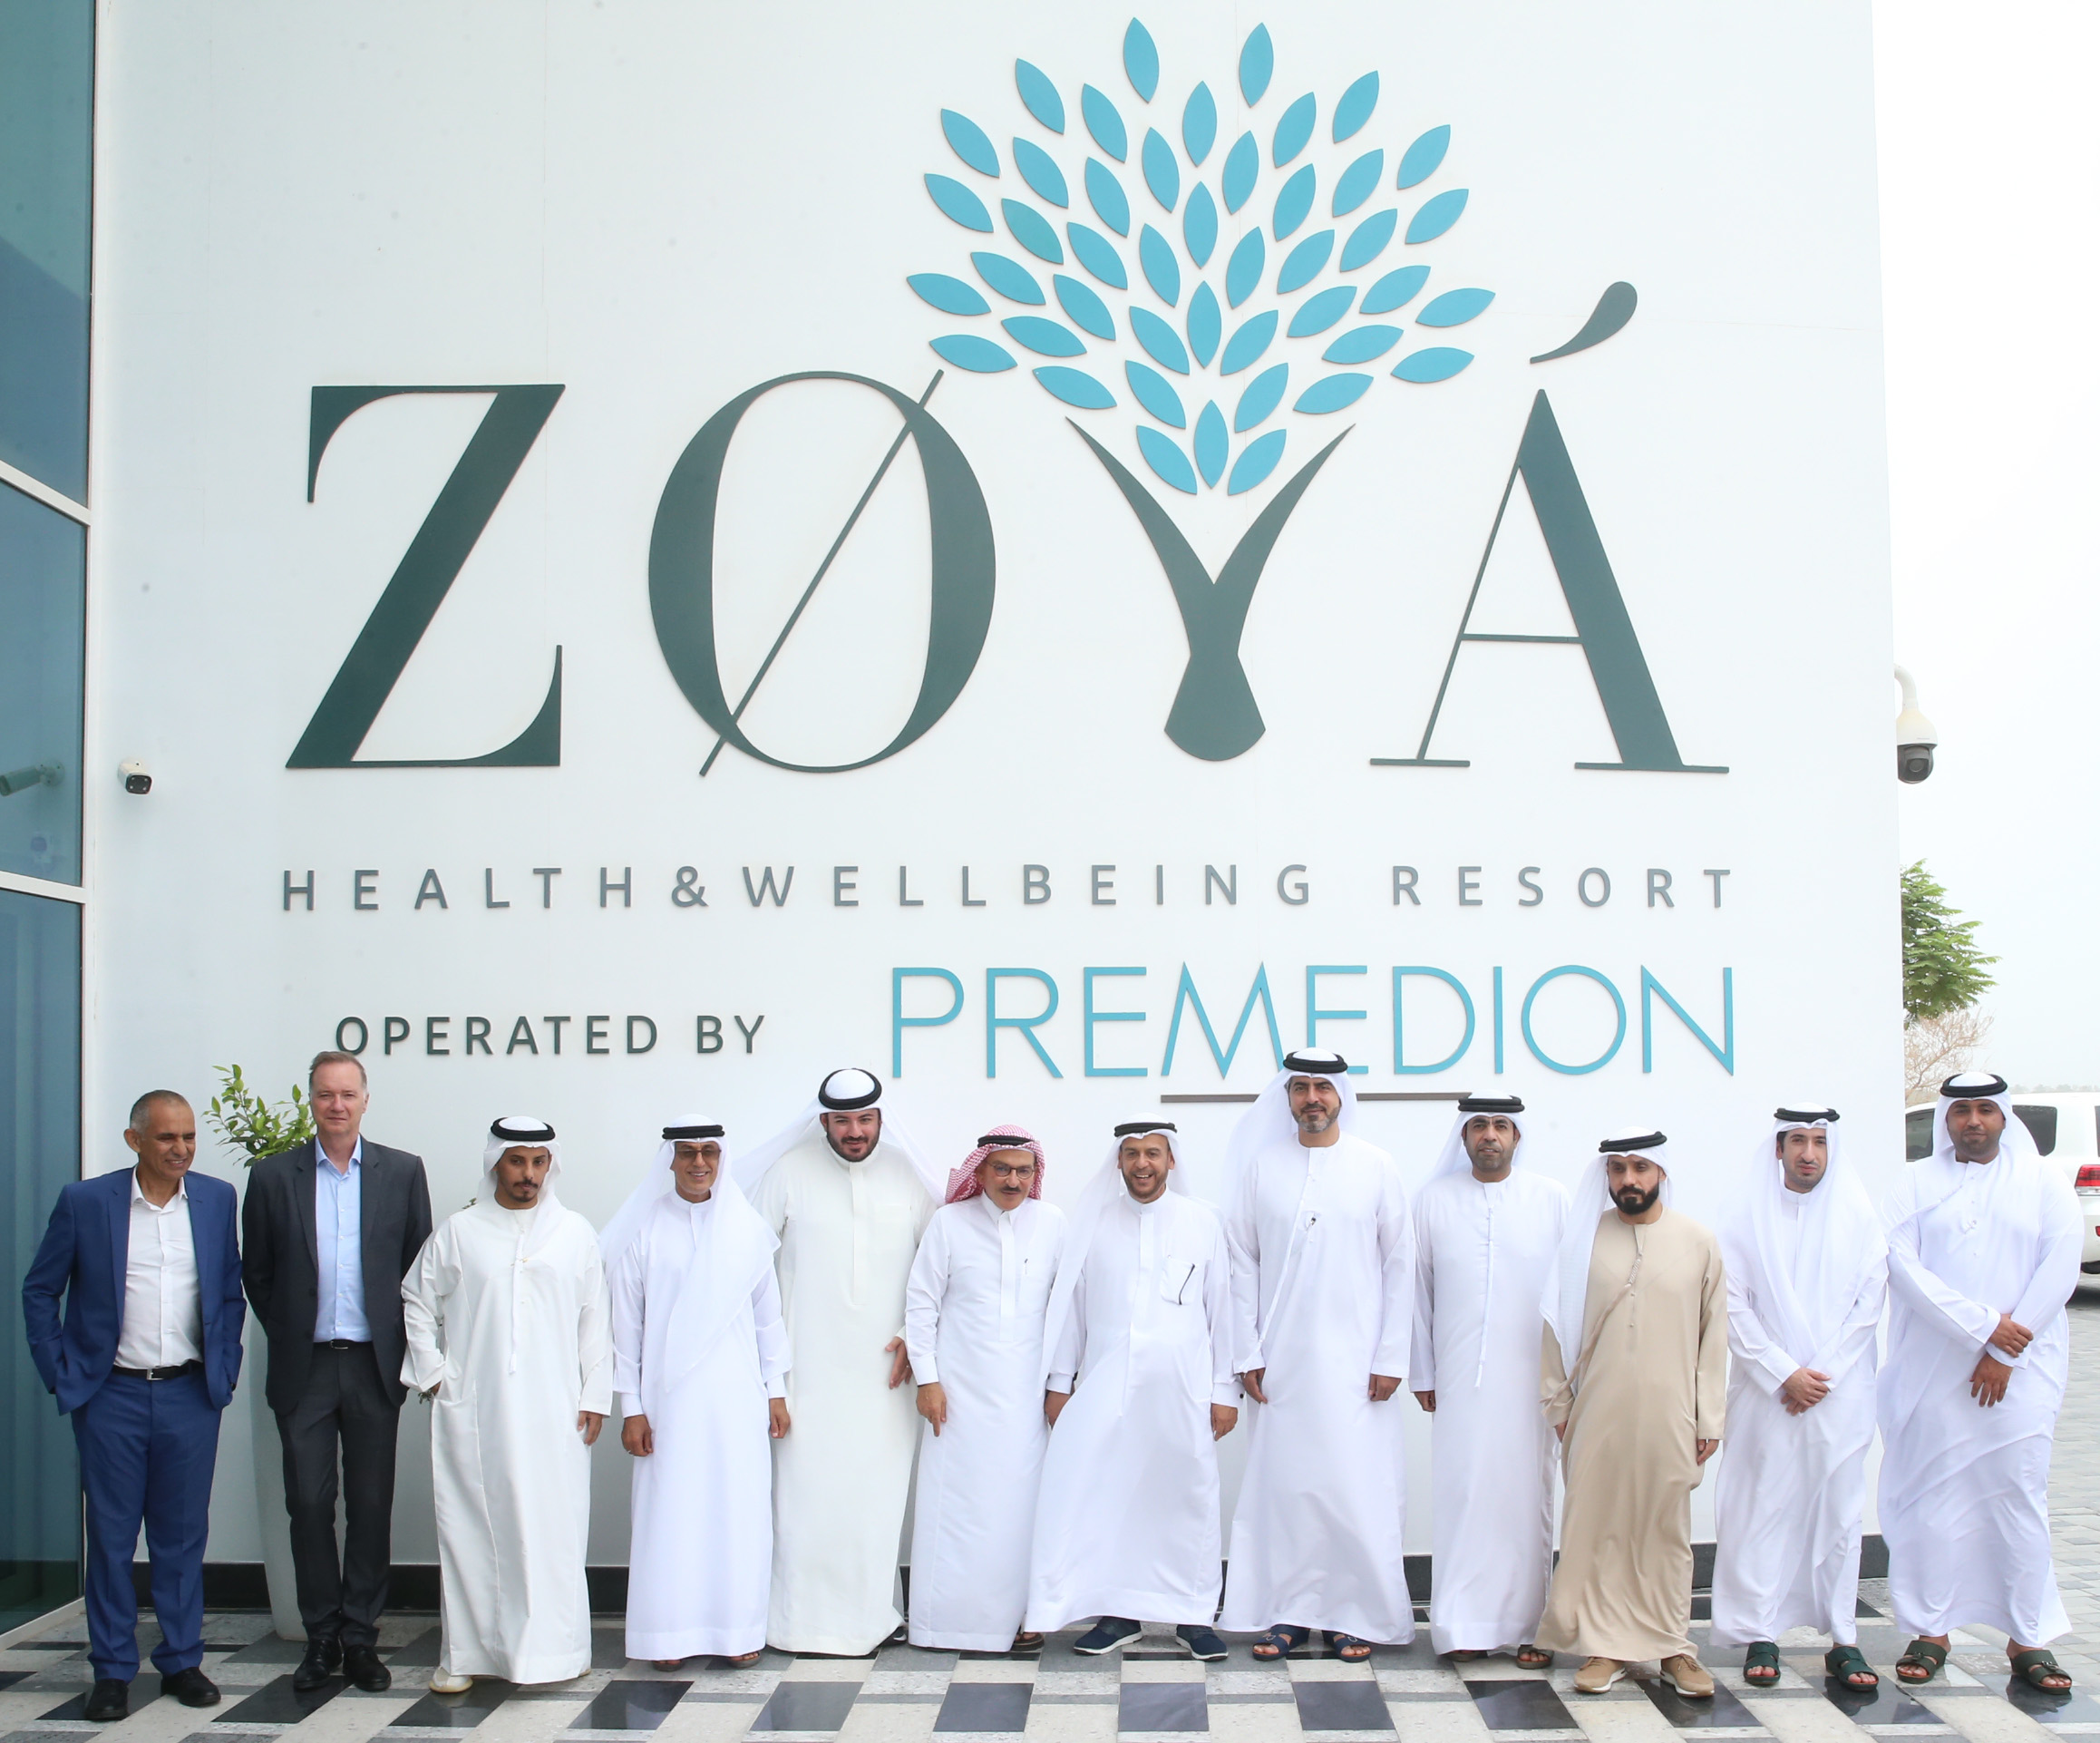 Zoya Health & Wellbeing Resort In Ajman Provides An Innovative Concept Of The Health And Wellness Tourism